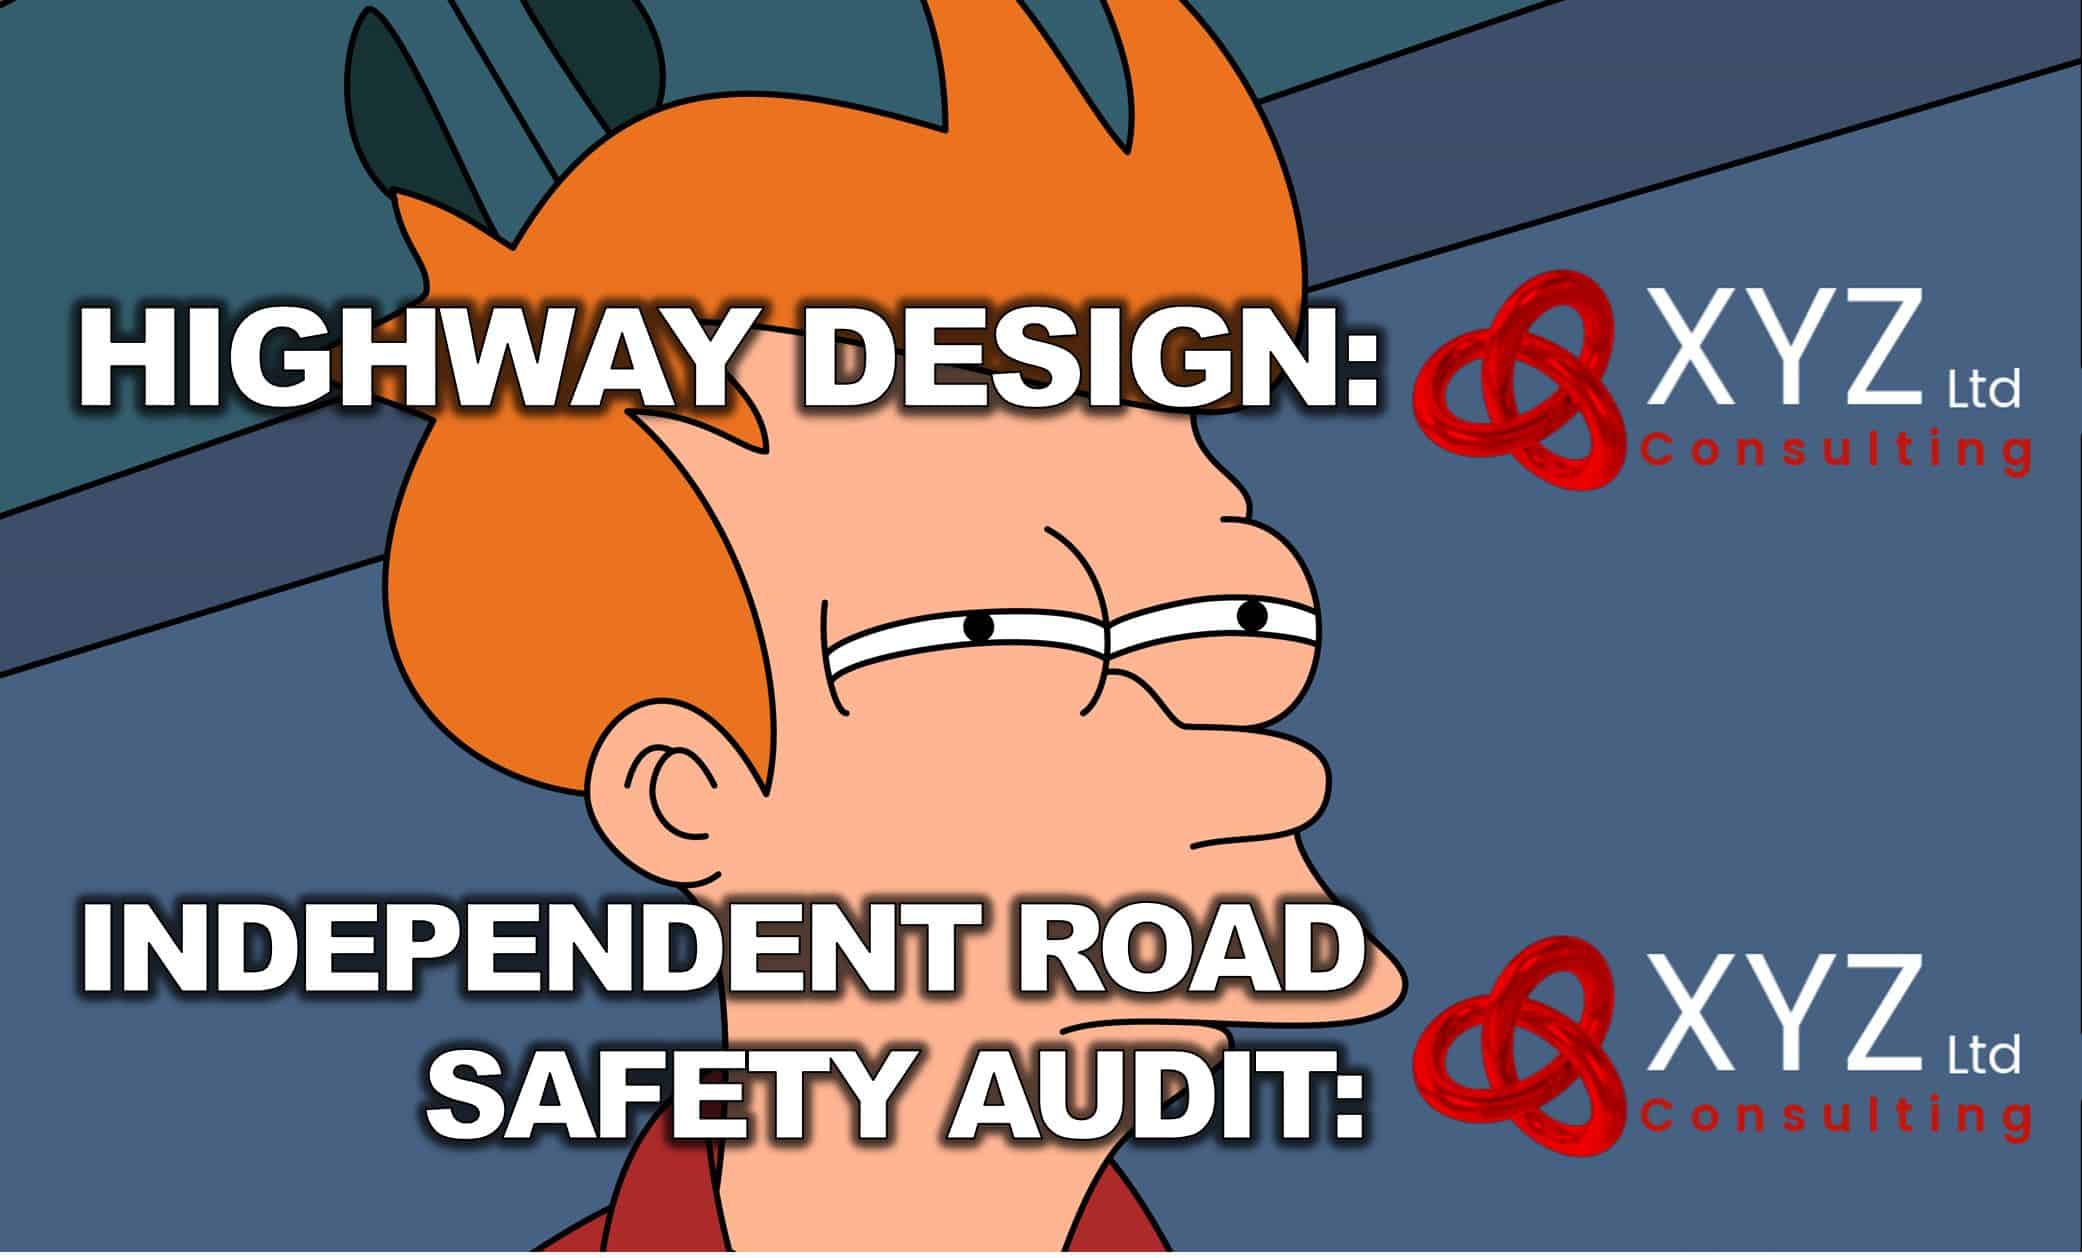 Should Road Safety Audits be carried out by the company who designed them? Let’s discuss